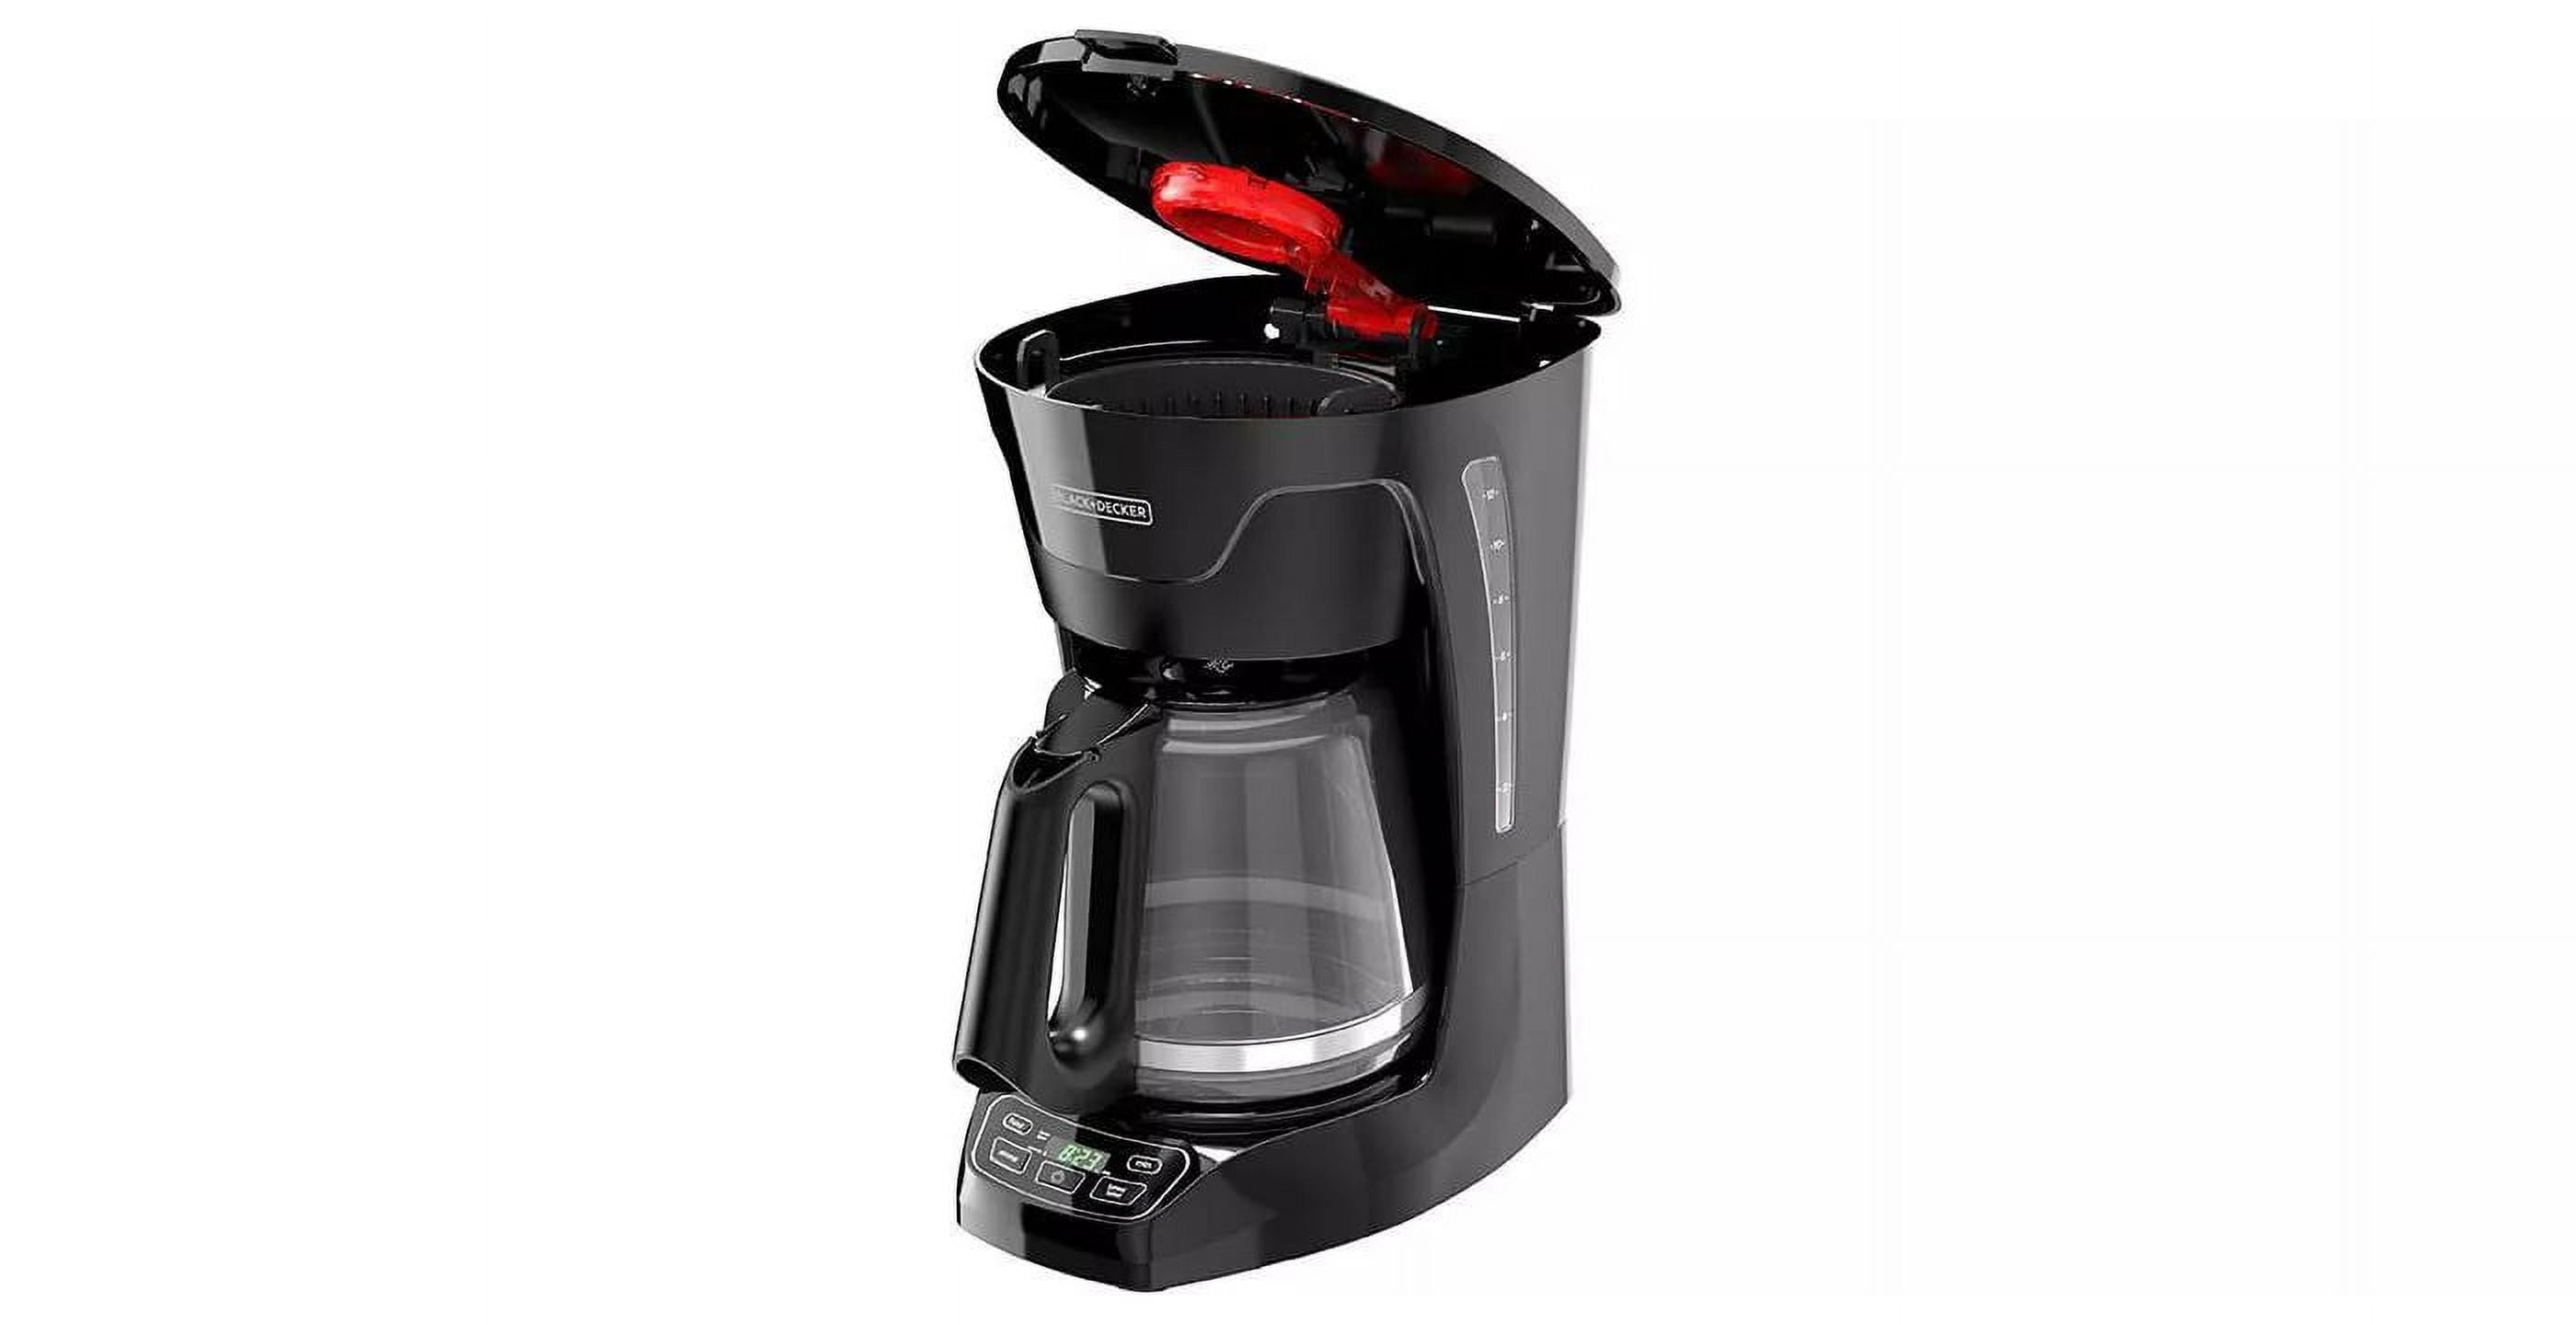 BLACK+DECKER 12-Cup Programmable Black Coffee Maker with Built-In Timer  CM2030B - The Home Depot